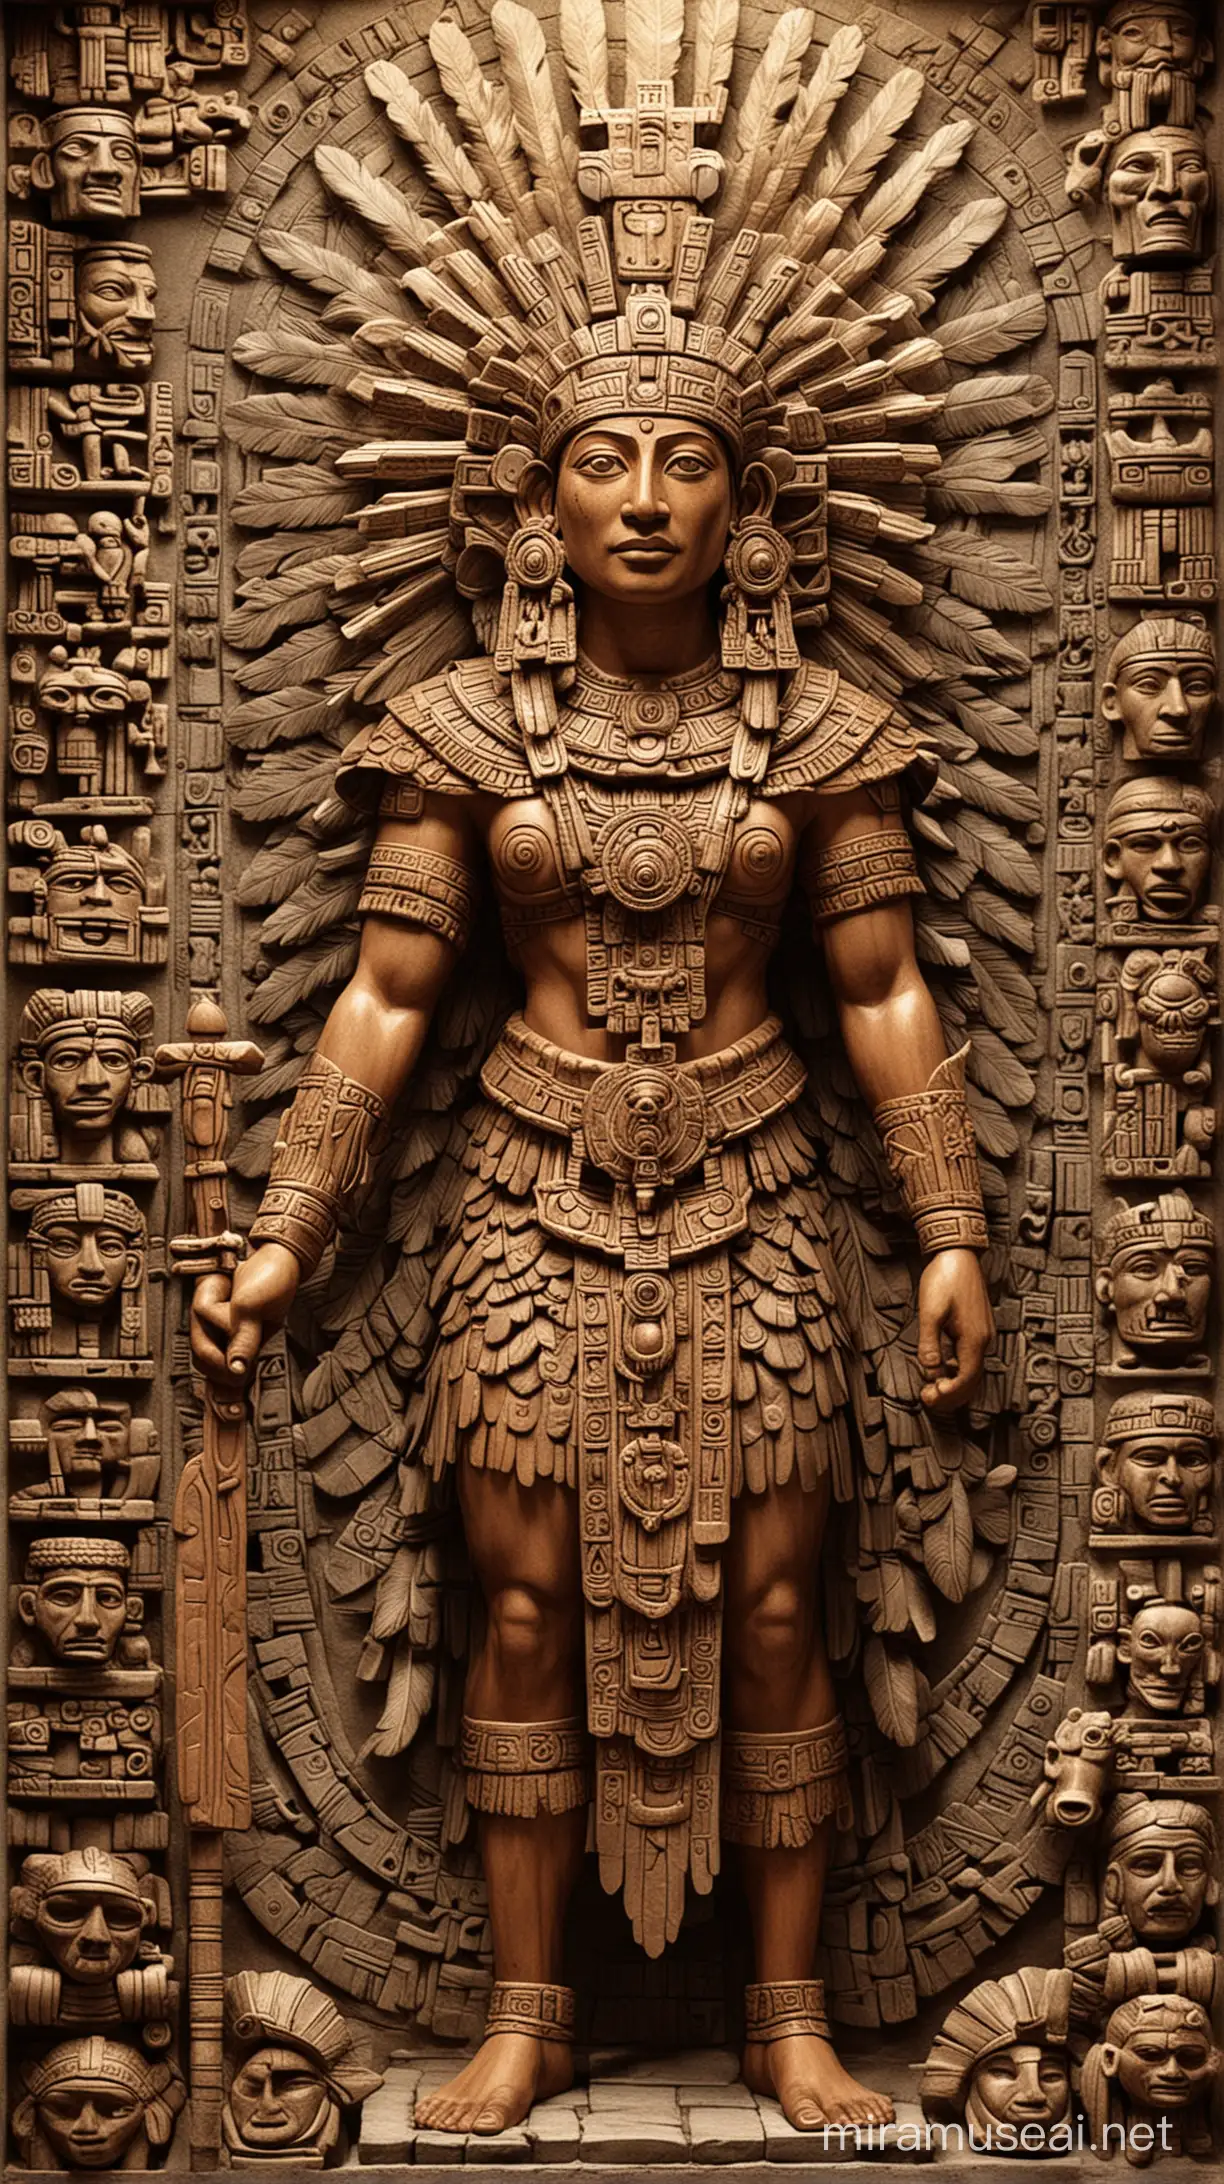 the Aztec gods, essential figures that illuminate the depths of Aztec culture and belief. These divine beings shaped not only the spiritual landscape but also the very fabric of Aztec society, influencing everything from agriculture to warfare. 